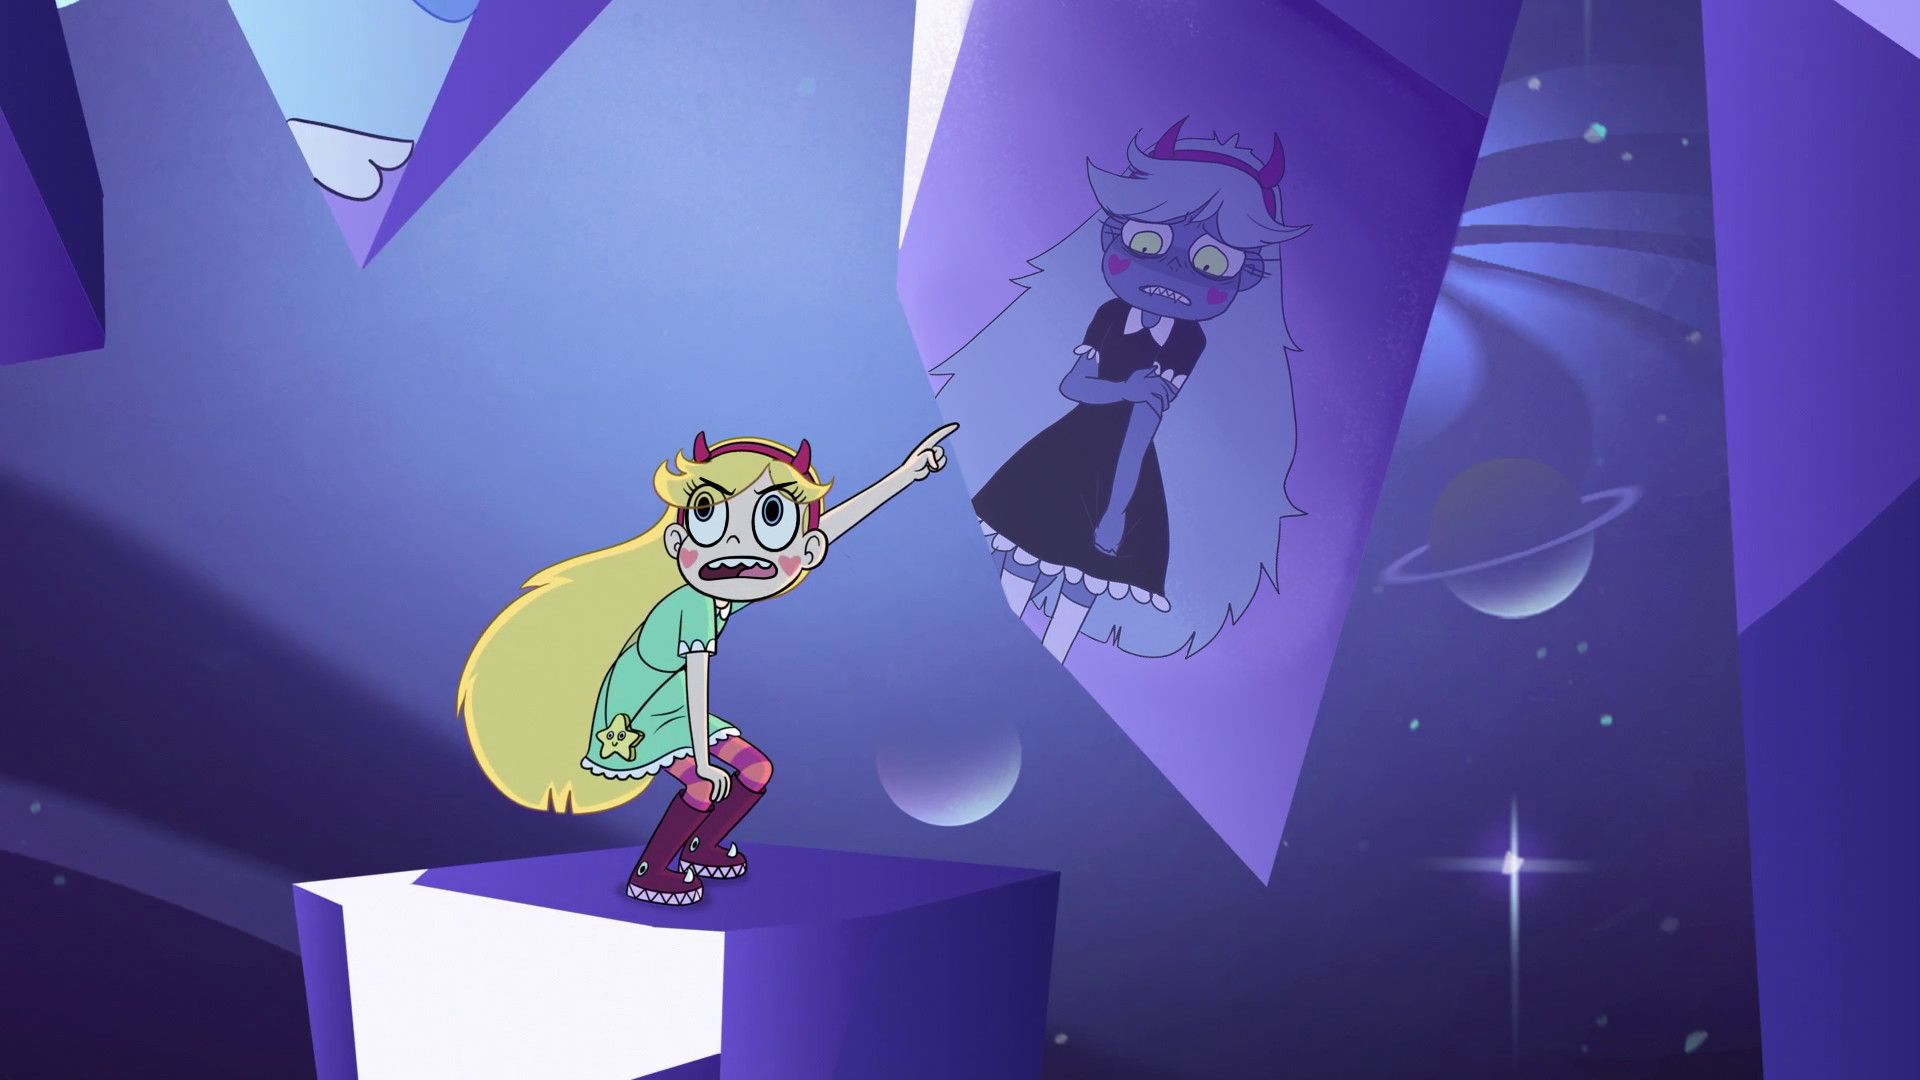 Star Vs The Forces Of Evil Computer Wallpapers - Wallpaper Cave